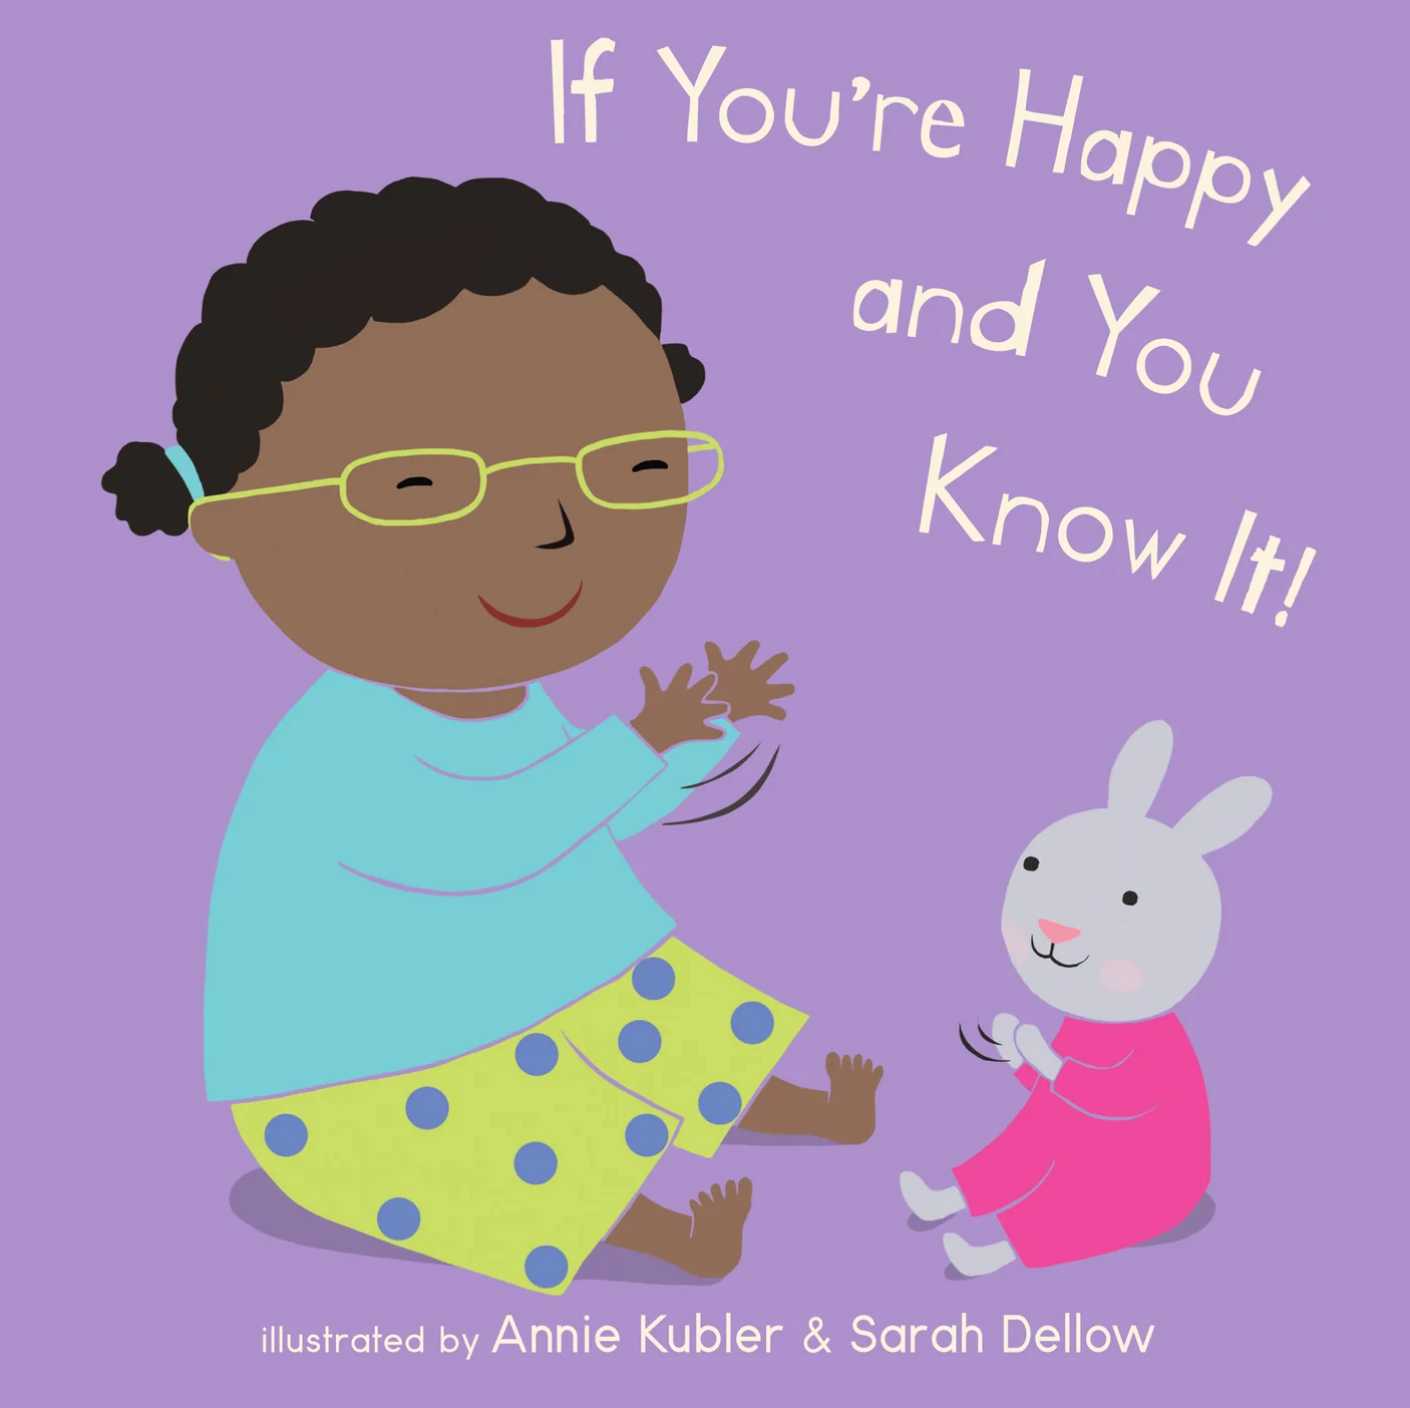 If You're Happy and You Know It! Book